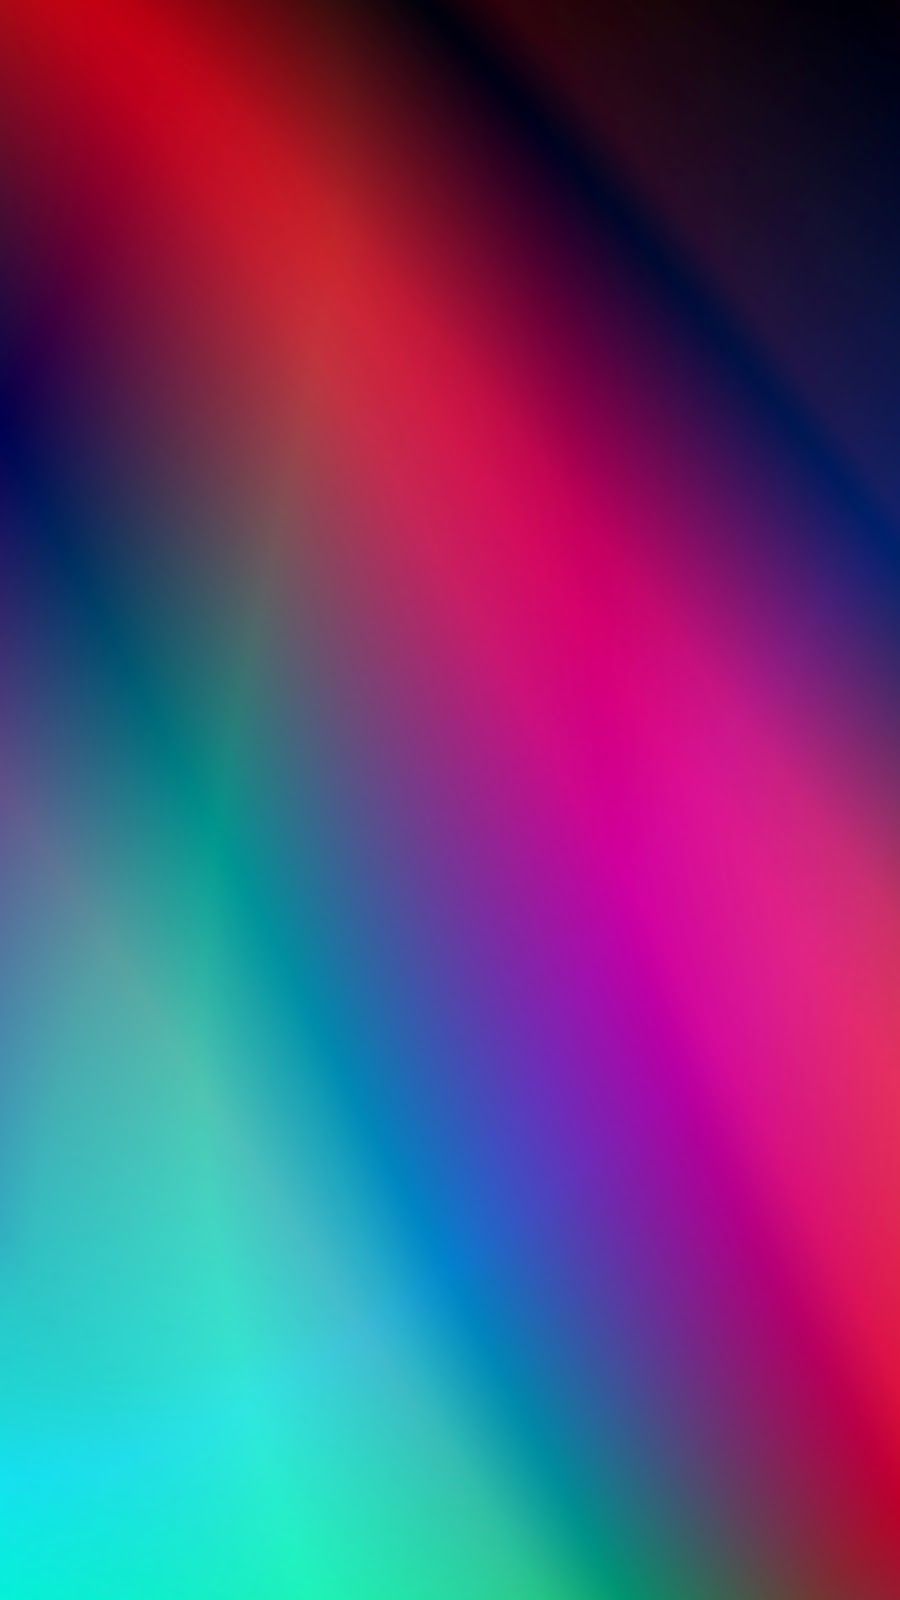 Download 24 Gradient Background Wallpaper for Phone. Cool